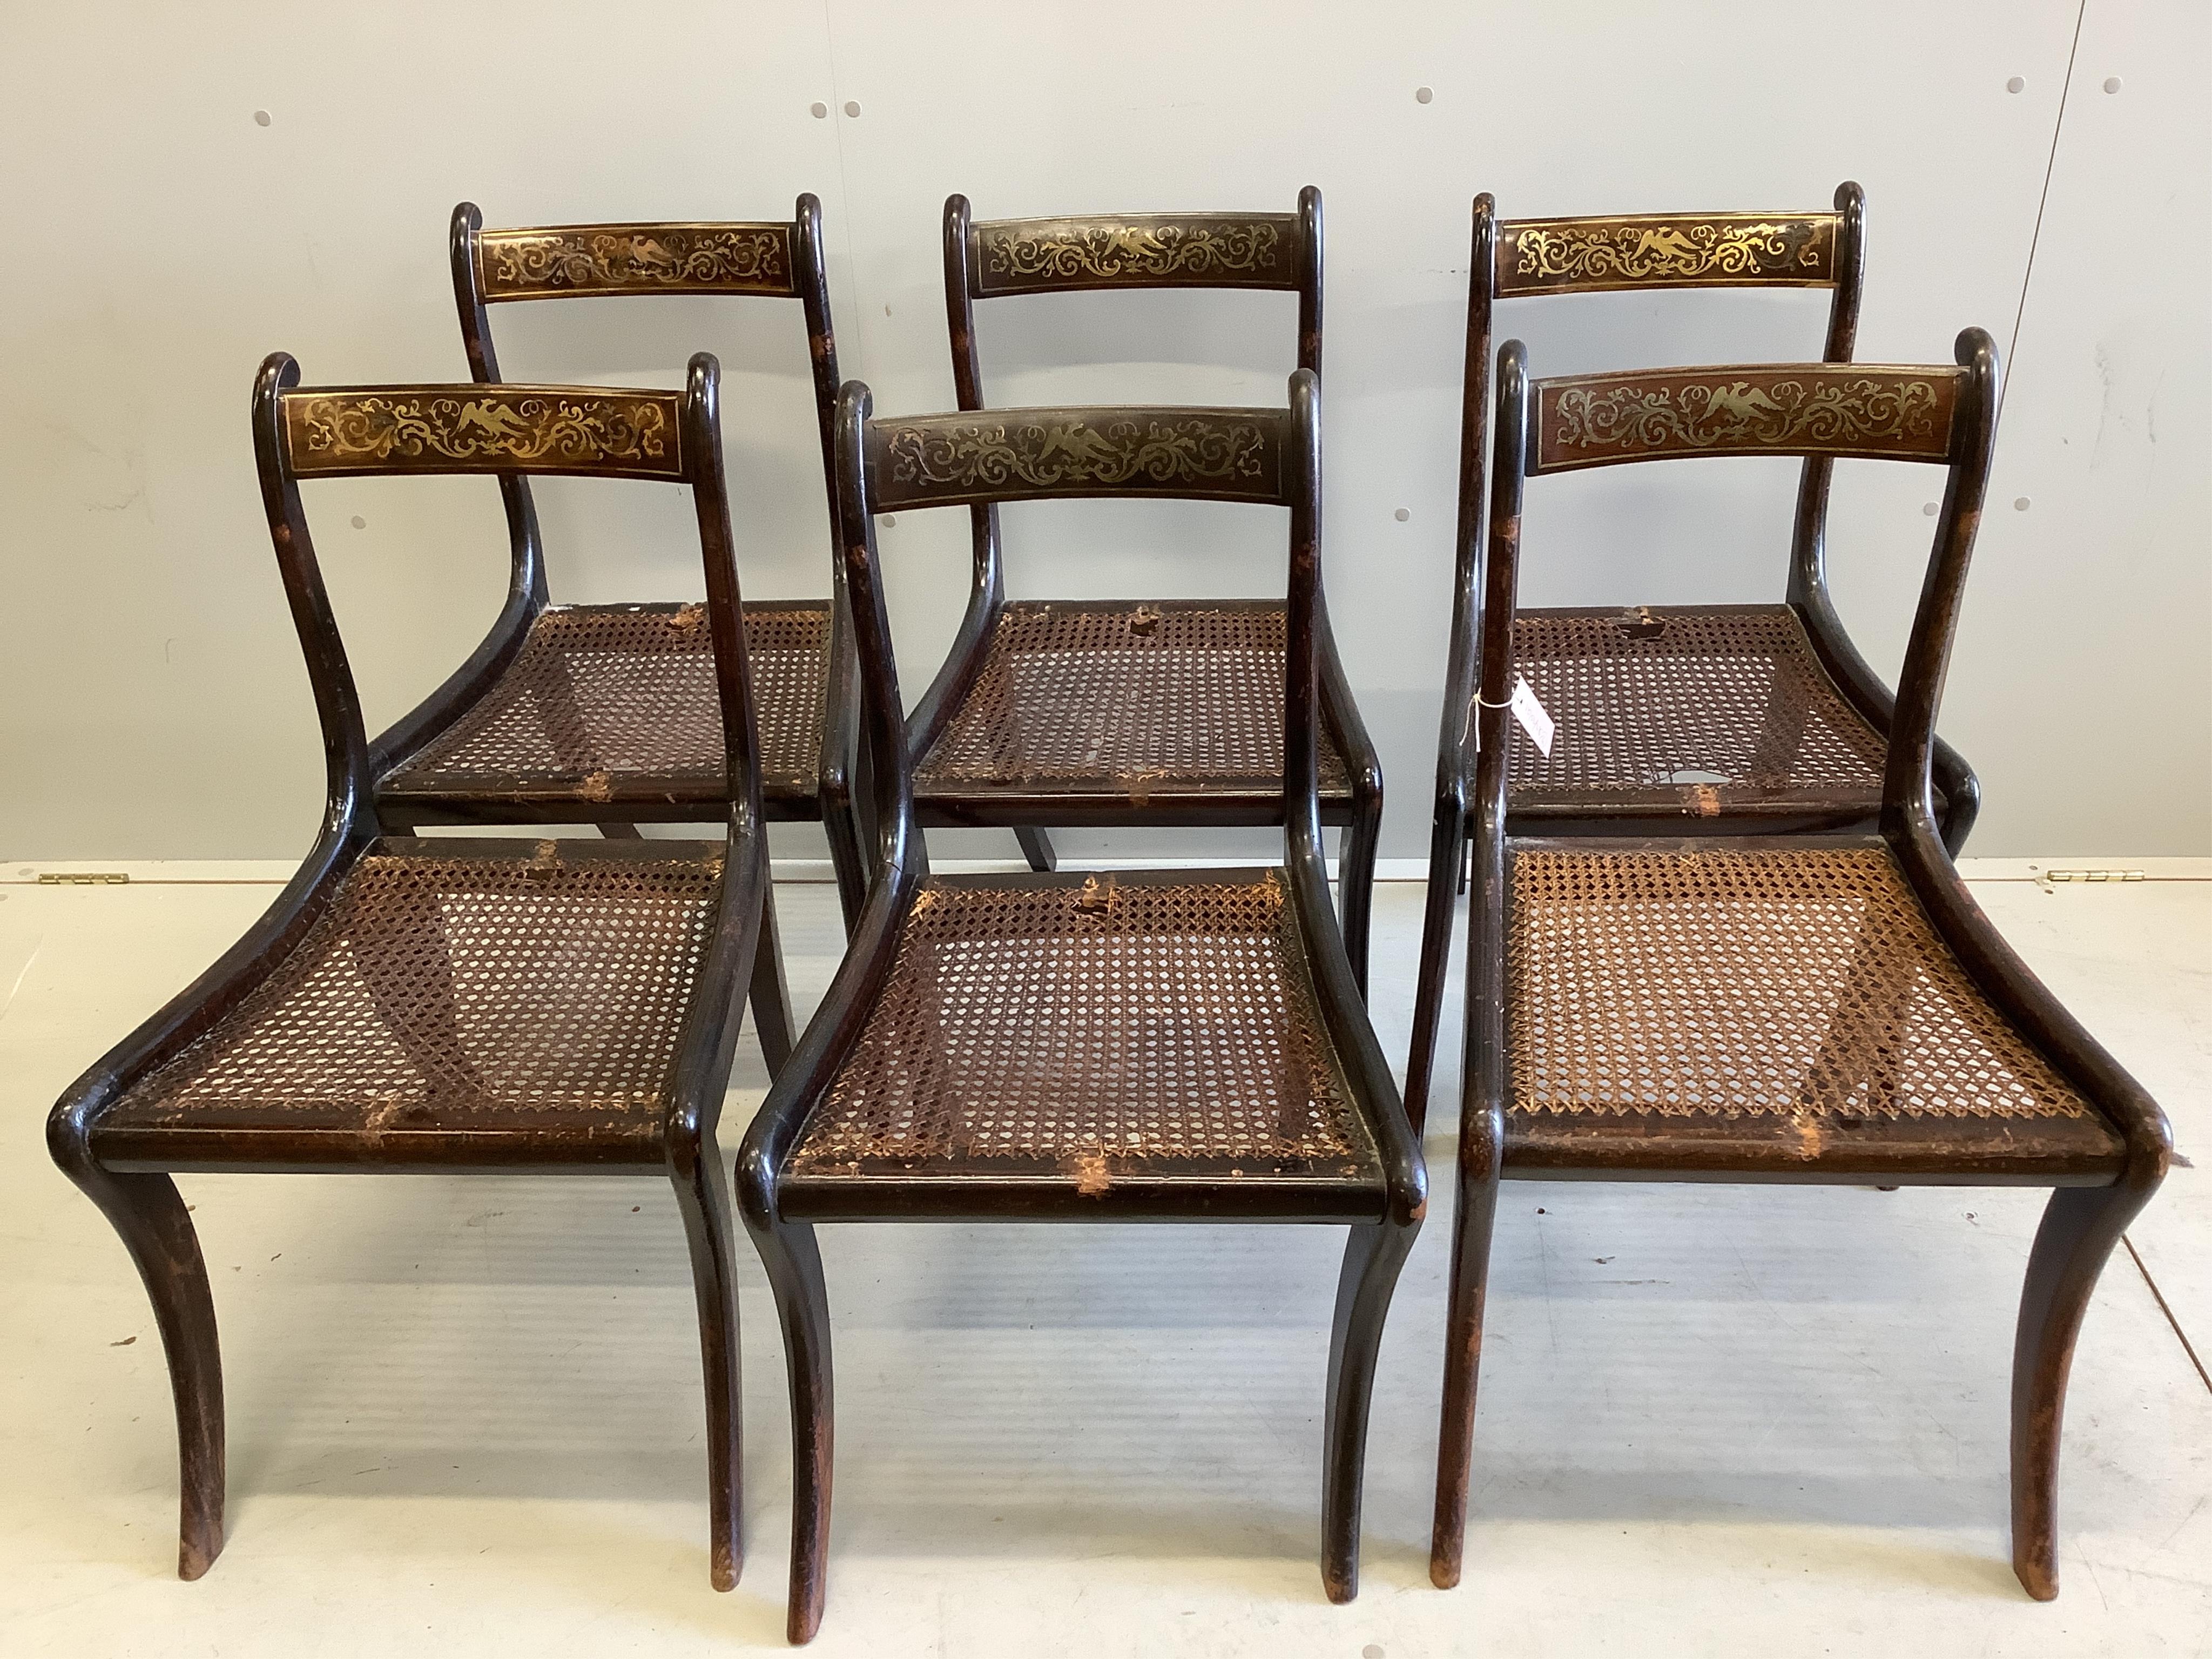 A set of six Regency rosewood and simulated rosewood dining chairs, the top rails inlaid with cut brass decoration, caned seats with slip-in cushions, on sabre legs